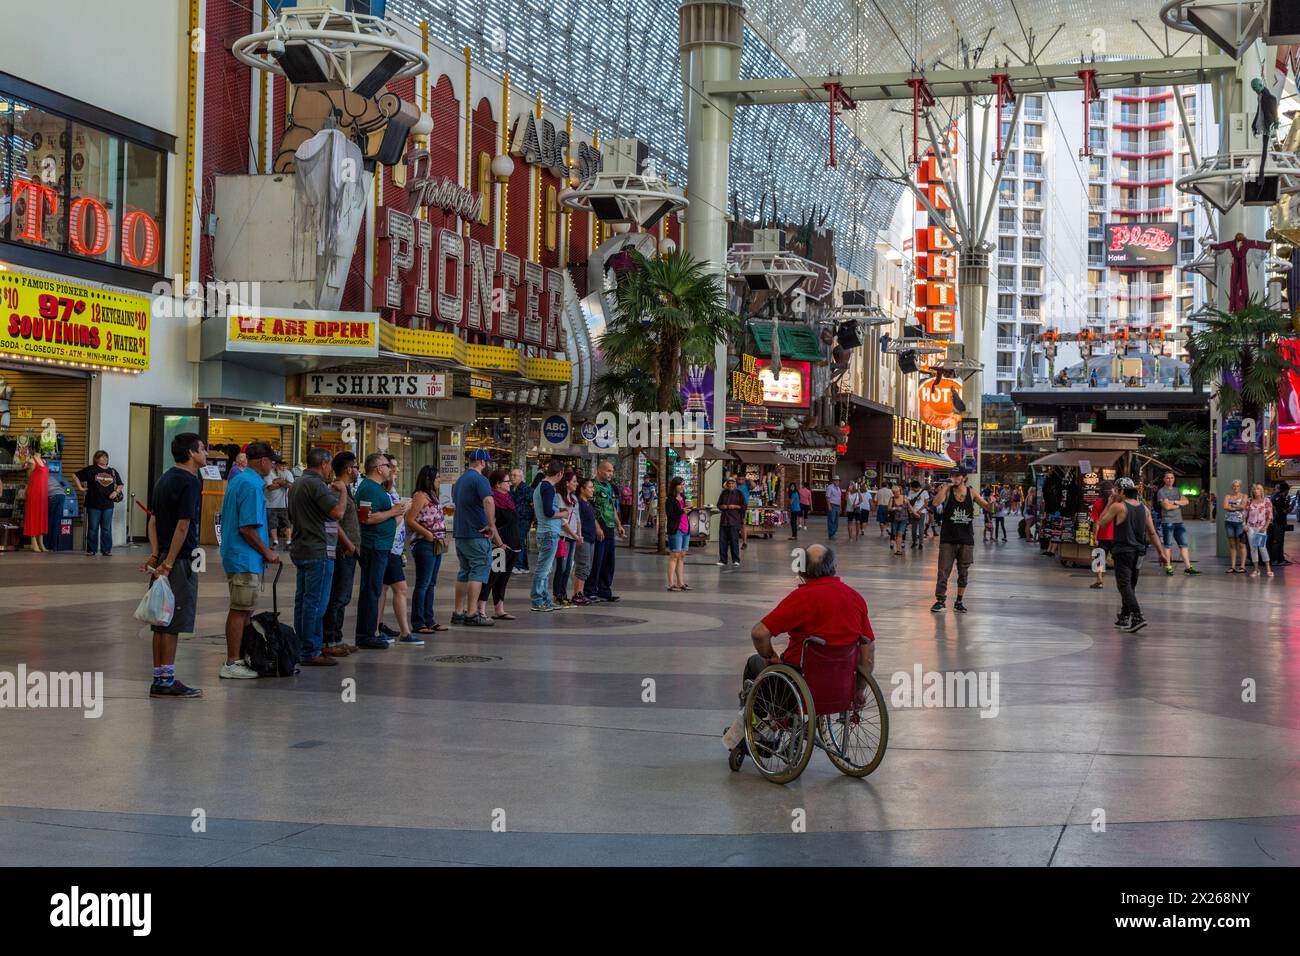 Las Vegas, Nevada.  Fremont Street, Two Street Performers Beginning to Assemble a Crowd. Stock Photo